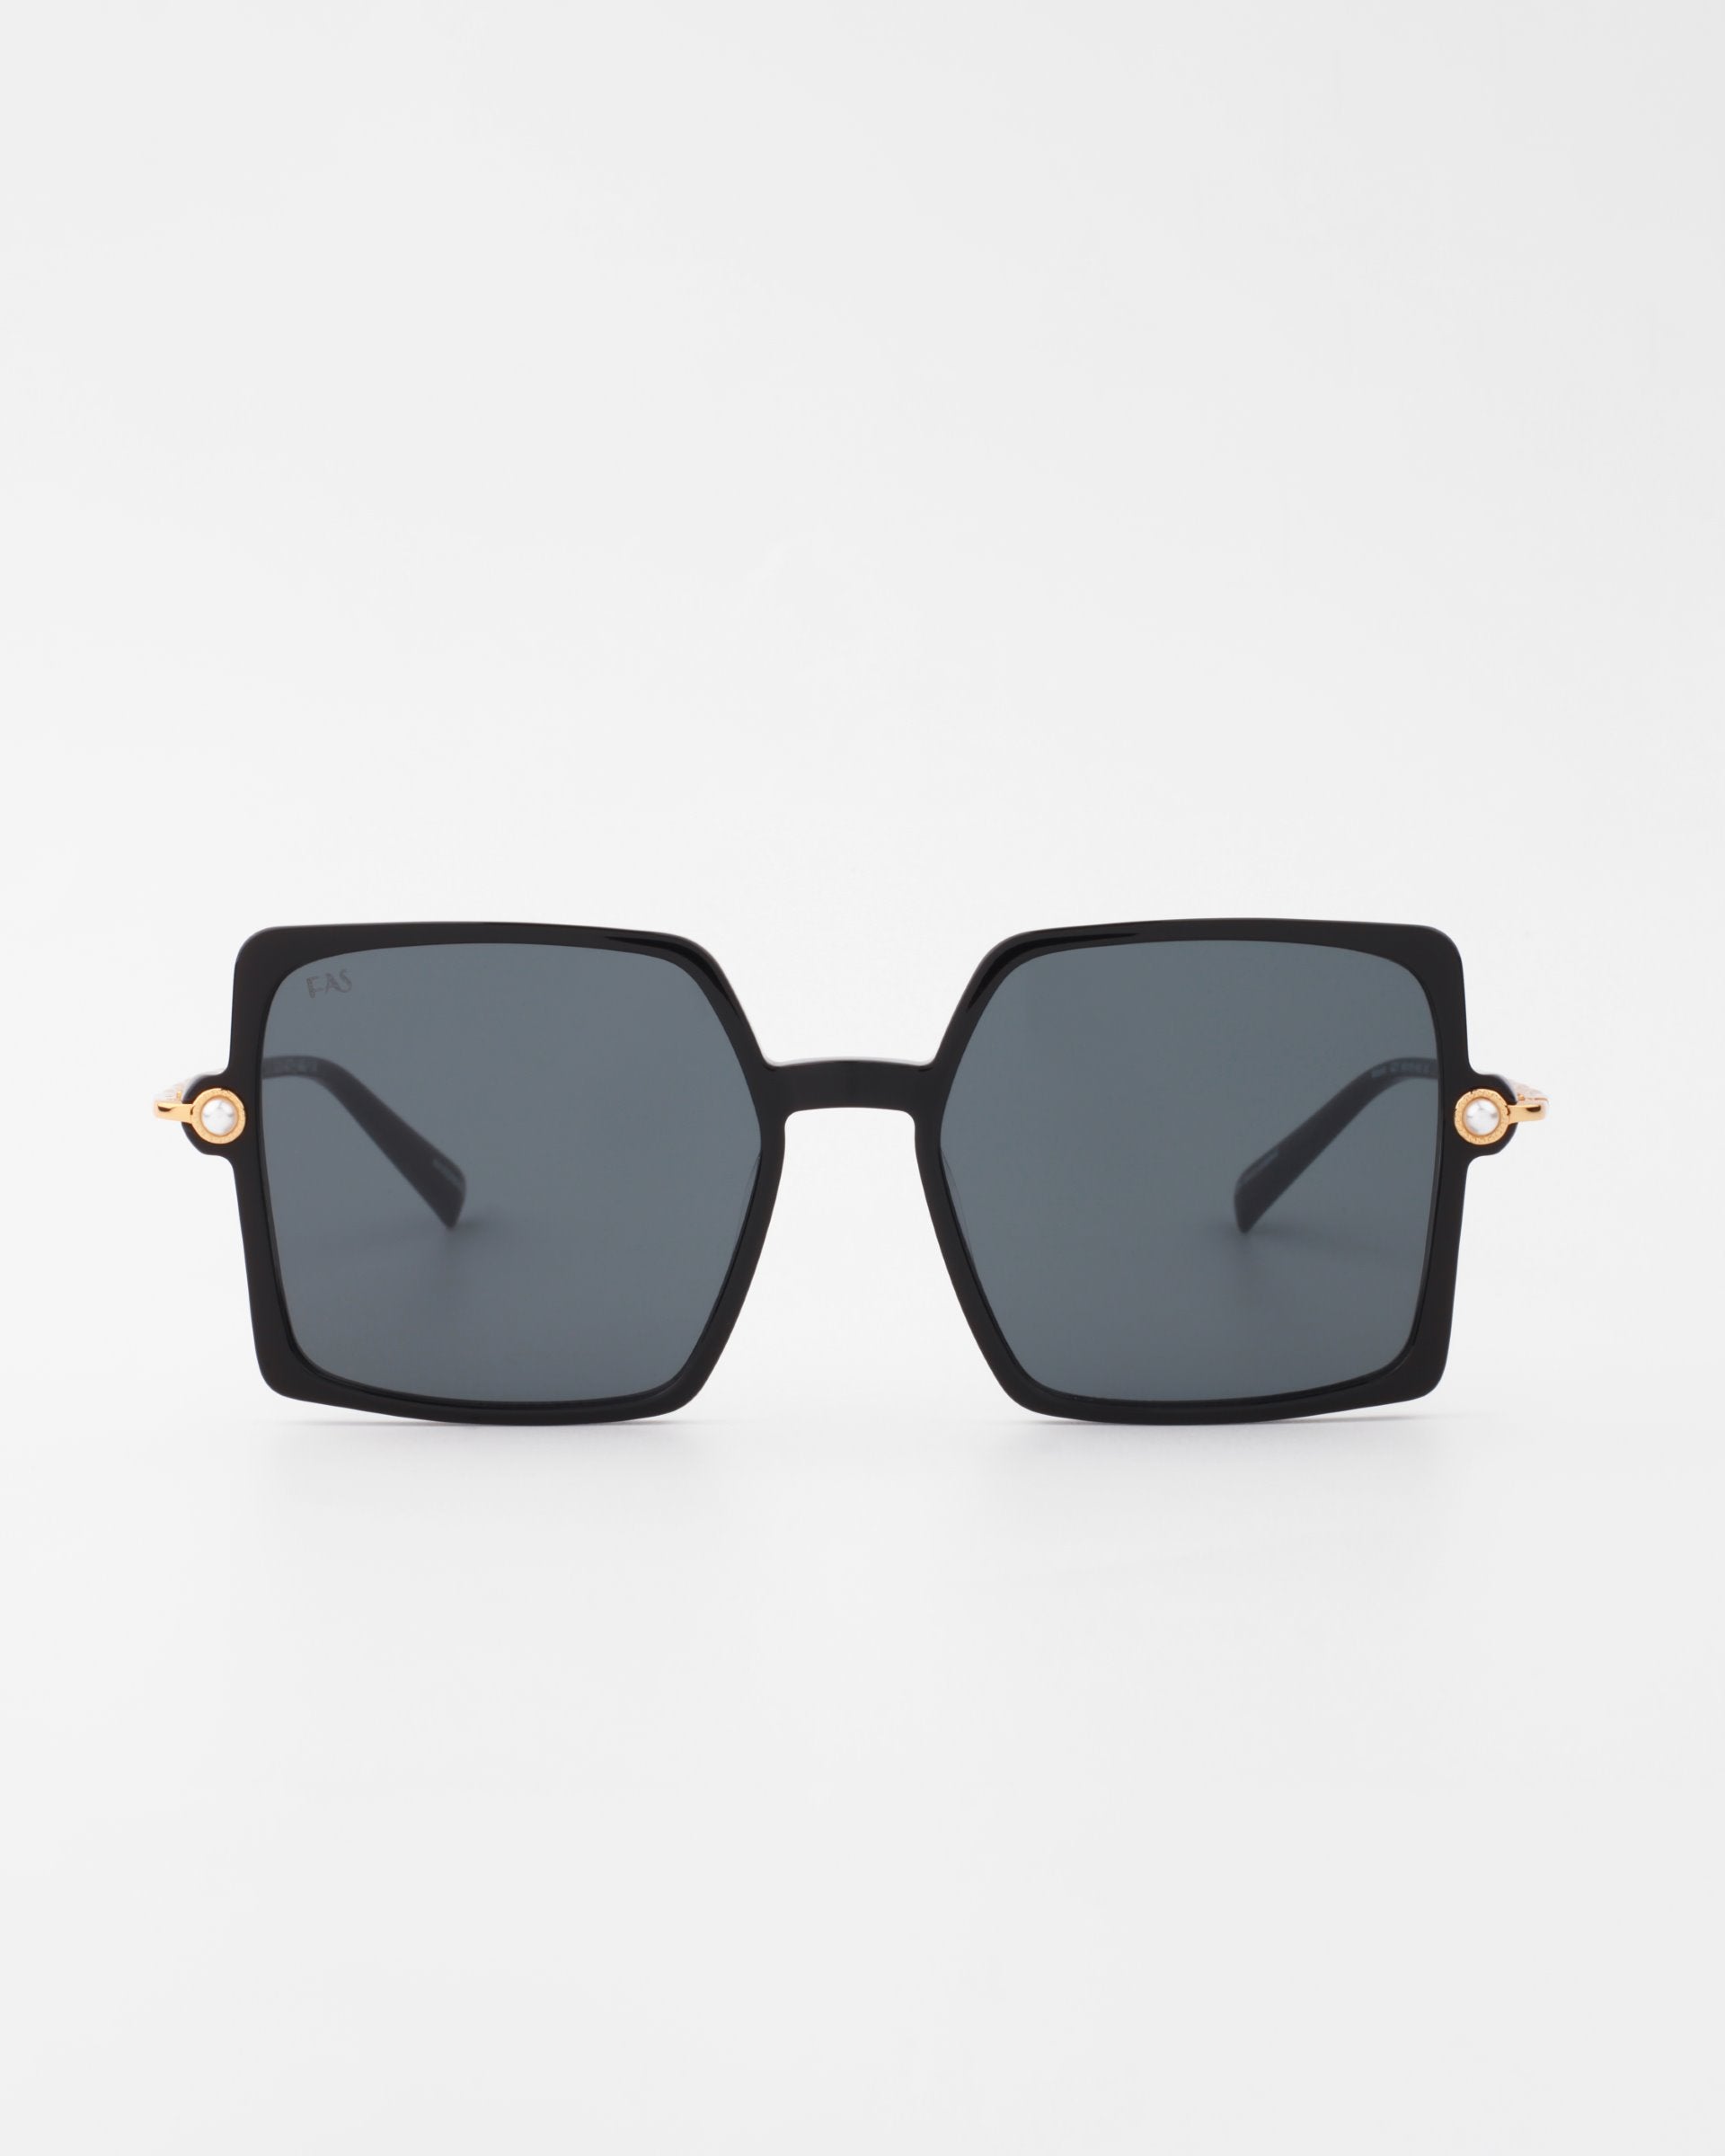 A pair of large, square-shaped sunglasses with black frames and dark lenses. The temples are sleek, featuring 18-karat gold-plated arms and a small gold accent on the hinges. Handmade acetate Moxie by For Art's Sake® offering UVA & UVB protection, the overall design is modern and stylish against a plain white background.